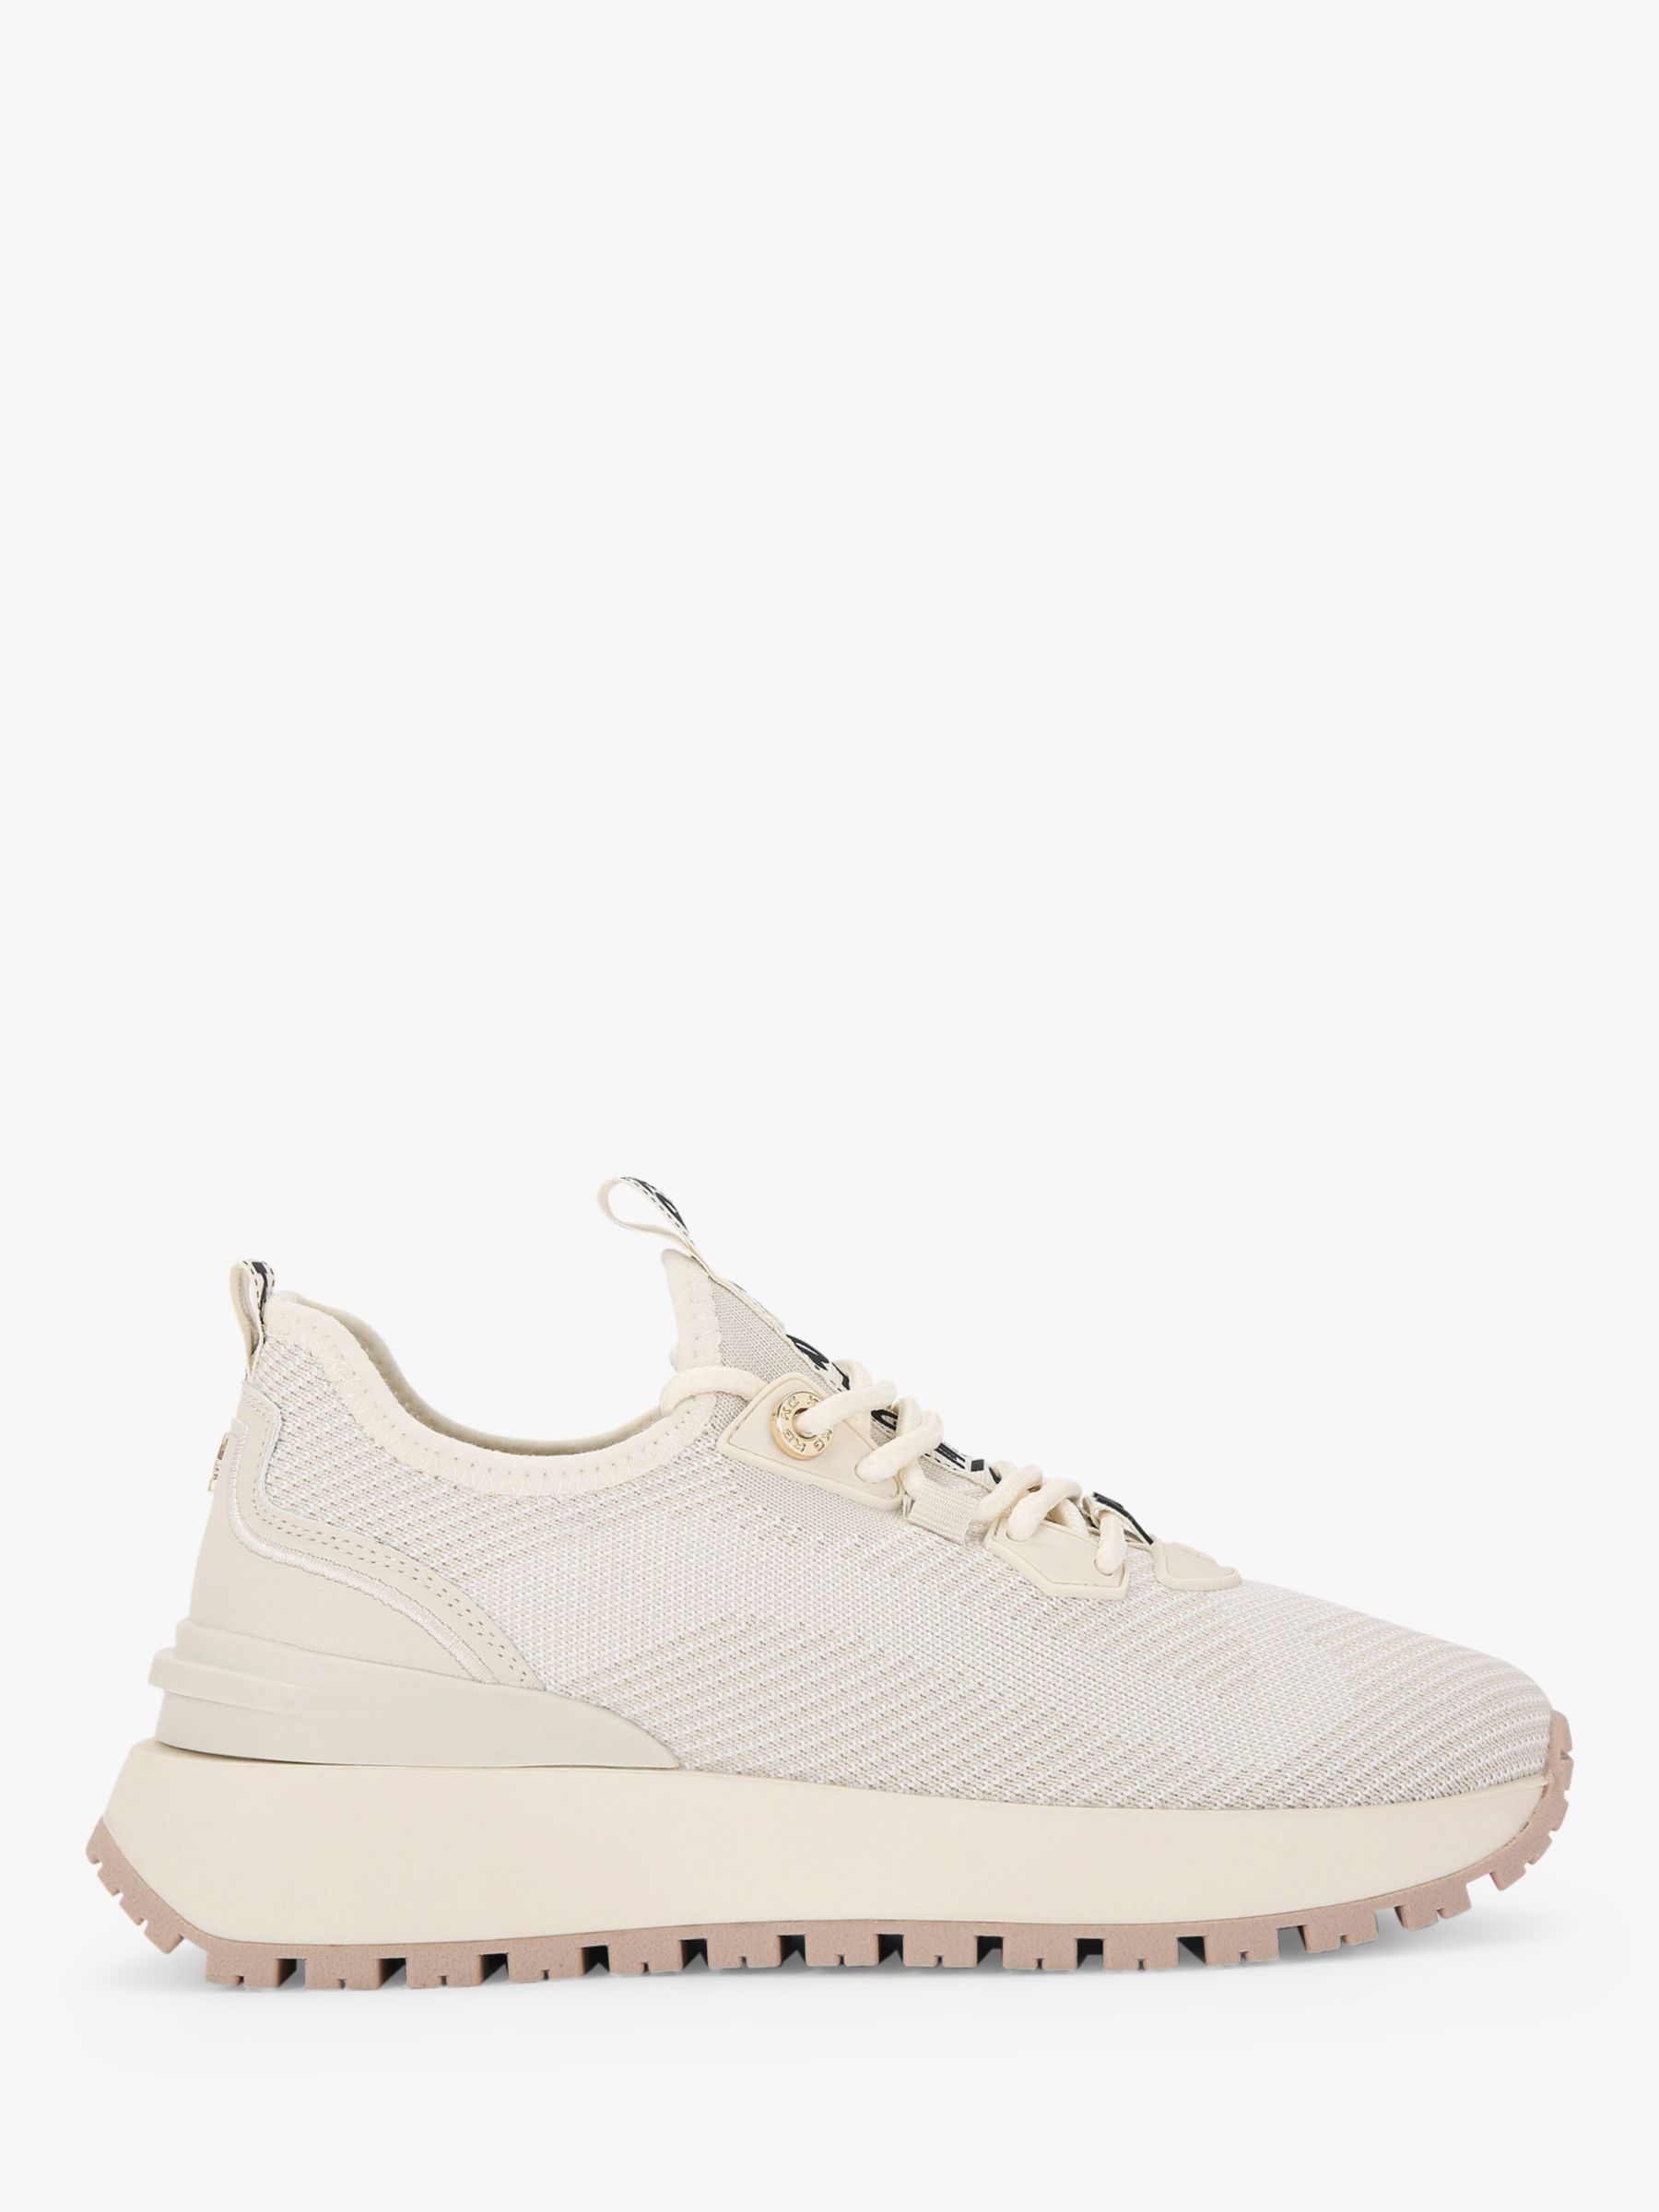 KG Kurt Geiger Louisa Knit Lace Up Trainers, Putty at John Lewis & Partners